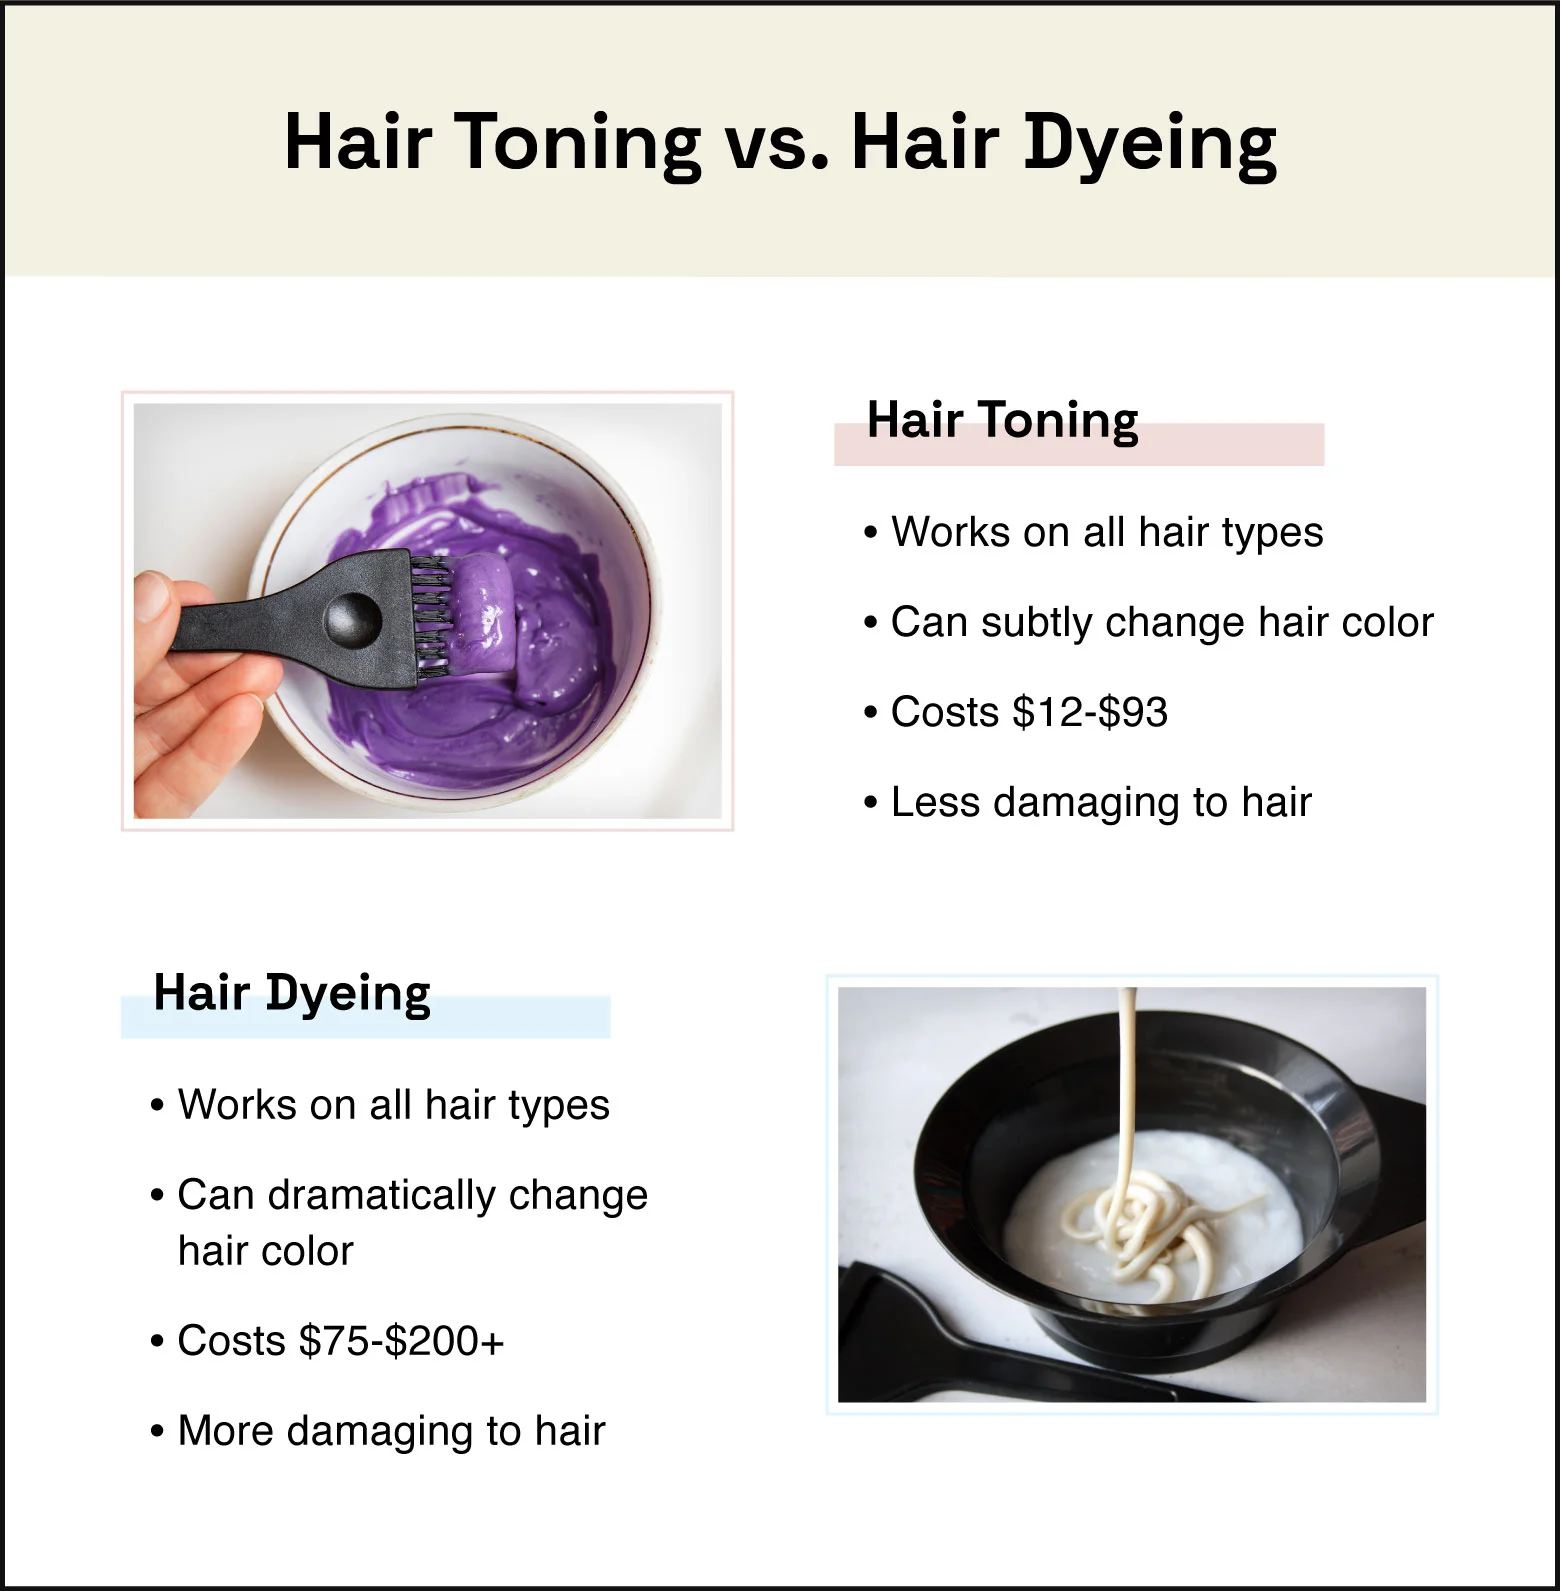 Images comparing the differences between hair toning versus hair dyeing.